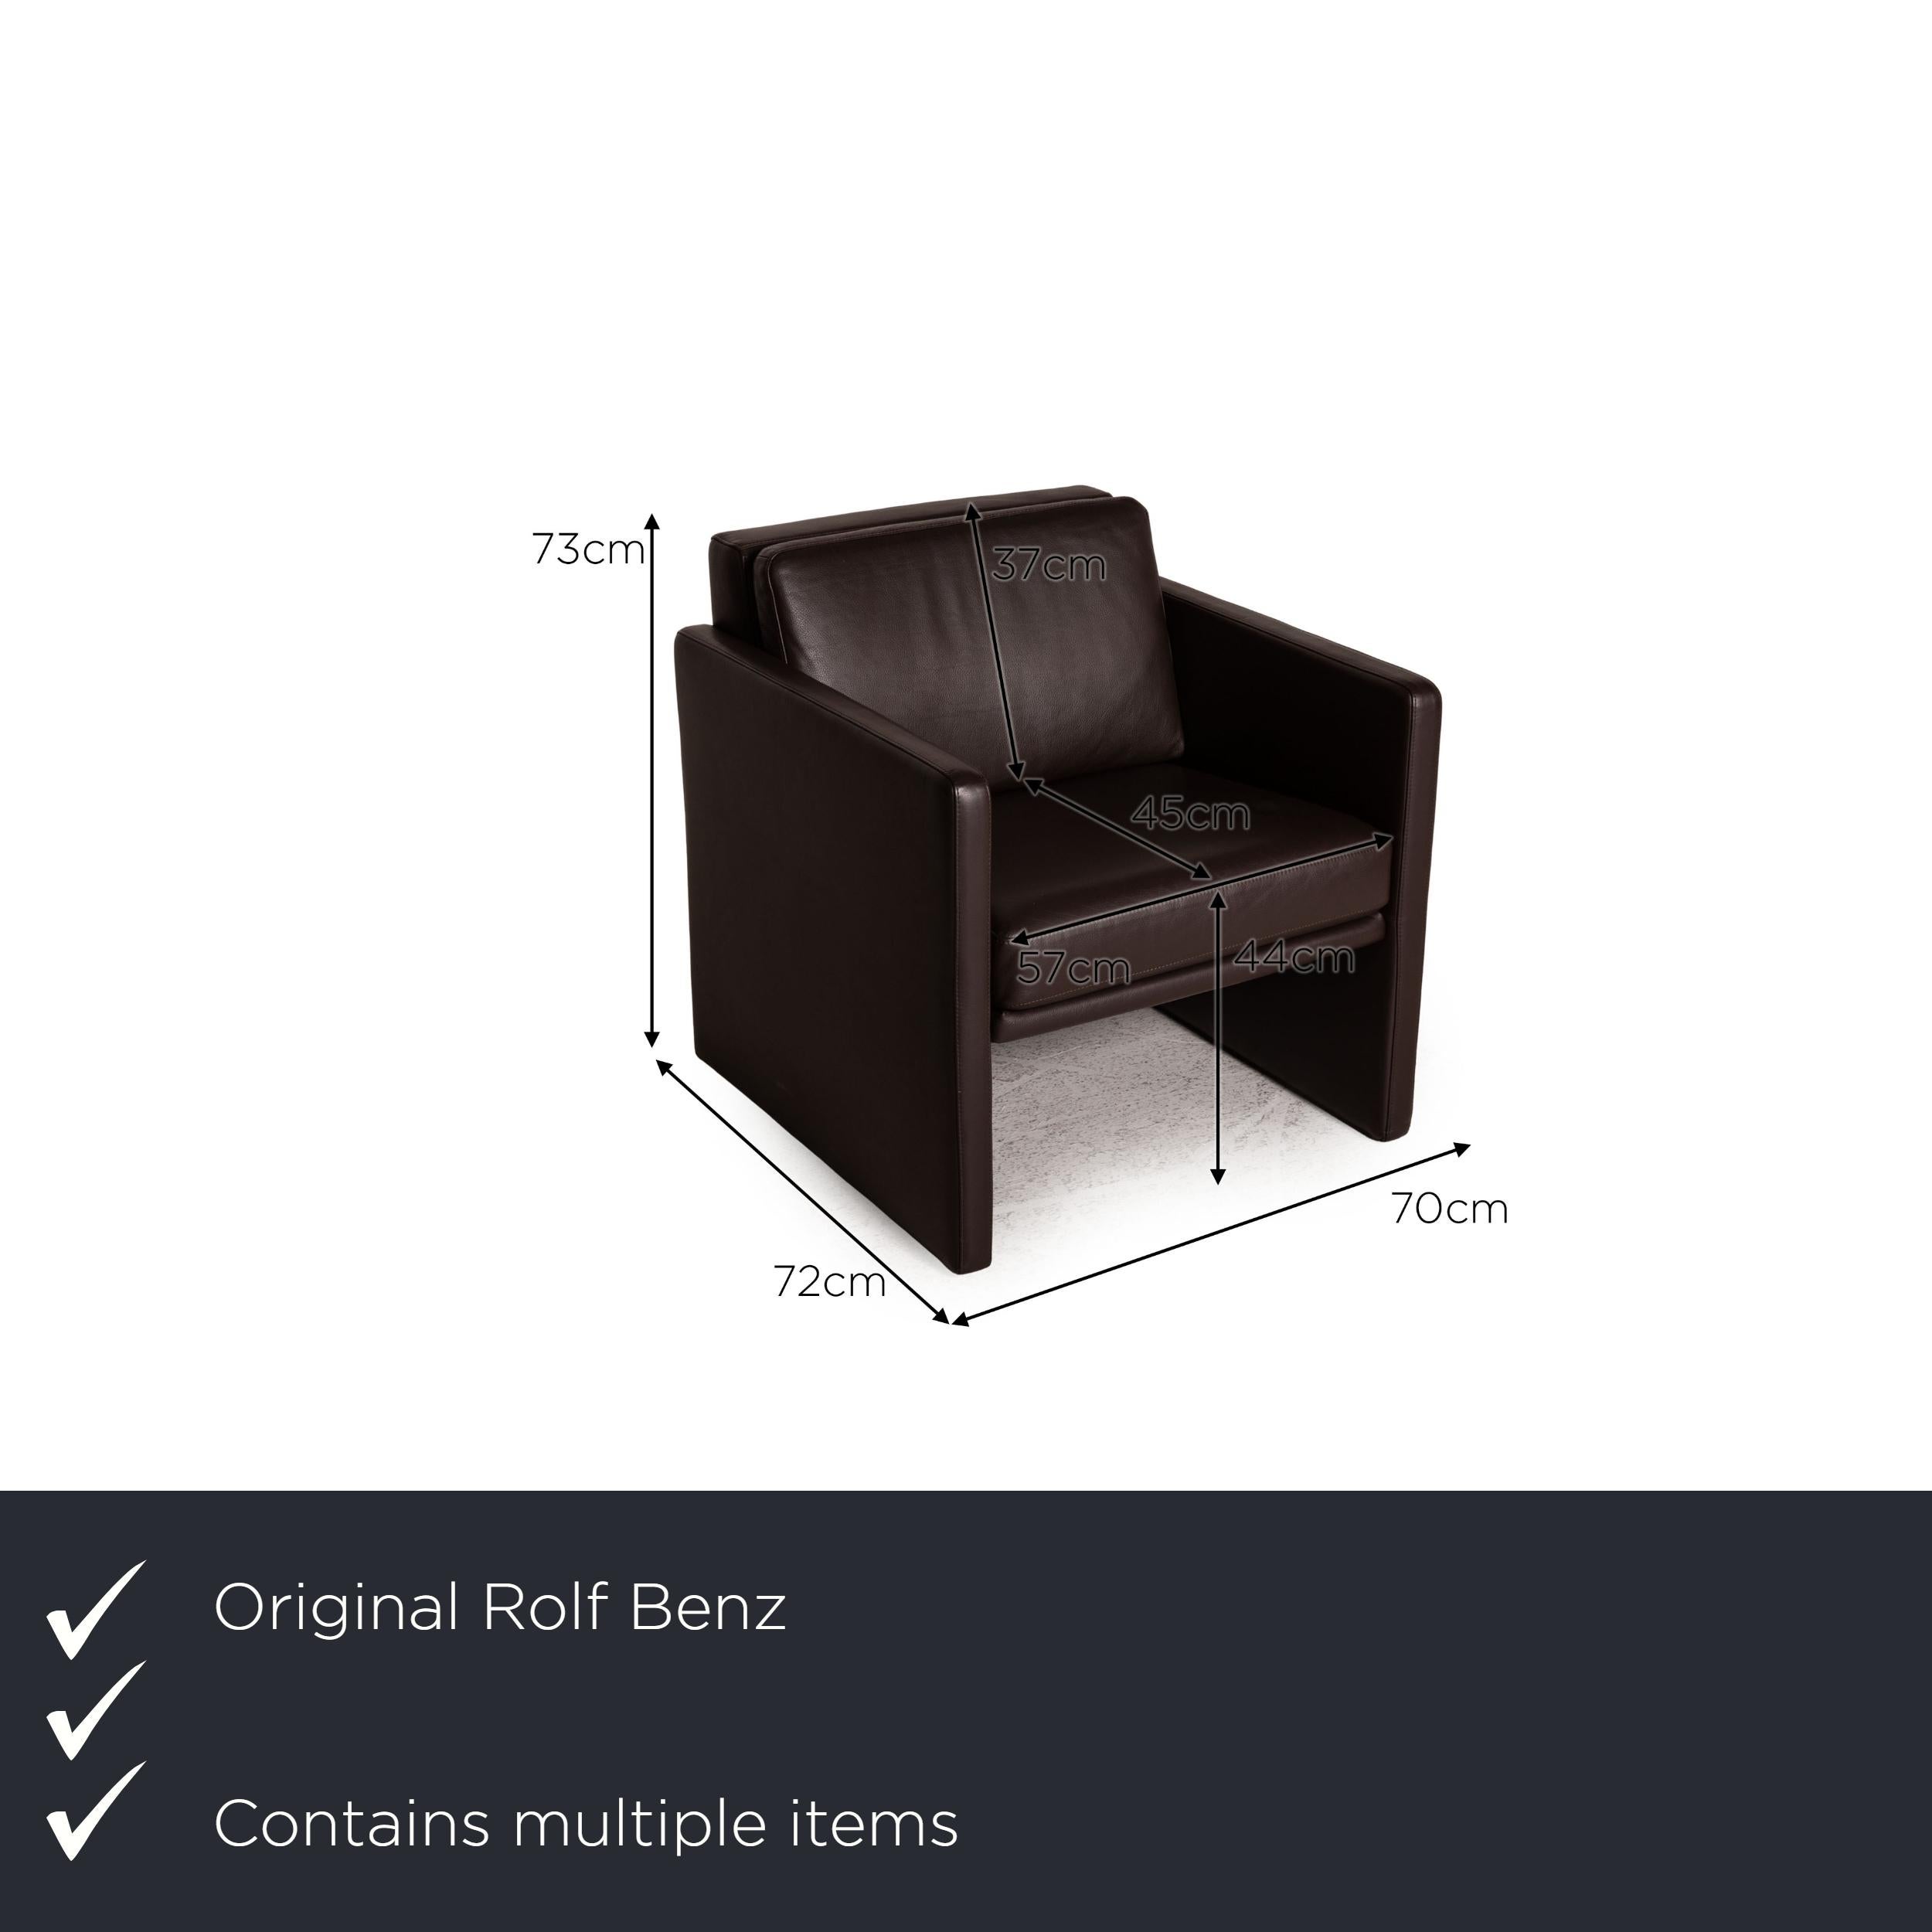 We present to you a Rolf Benz Ego leather armchair set dark brown 2x armchairs.

Product measurements in centimeters:

Depth: 72
Width: 70
Height: 73
Seat height: 44
Rest height: 62
Seat depth: 45
Seat width: 57
Back height: 37.

    